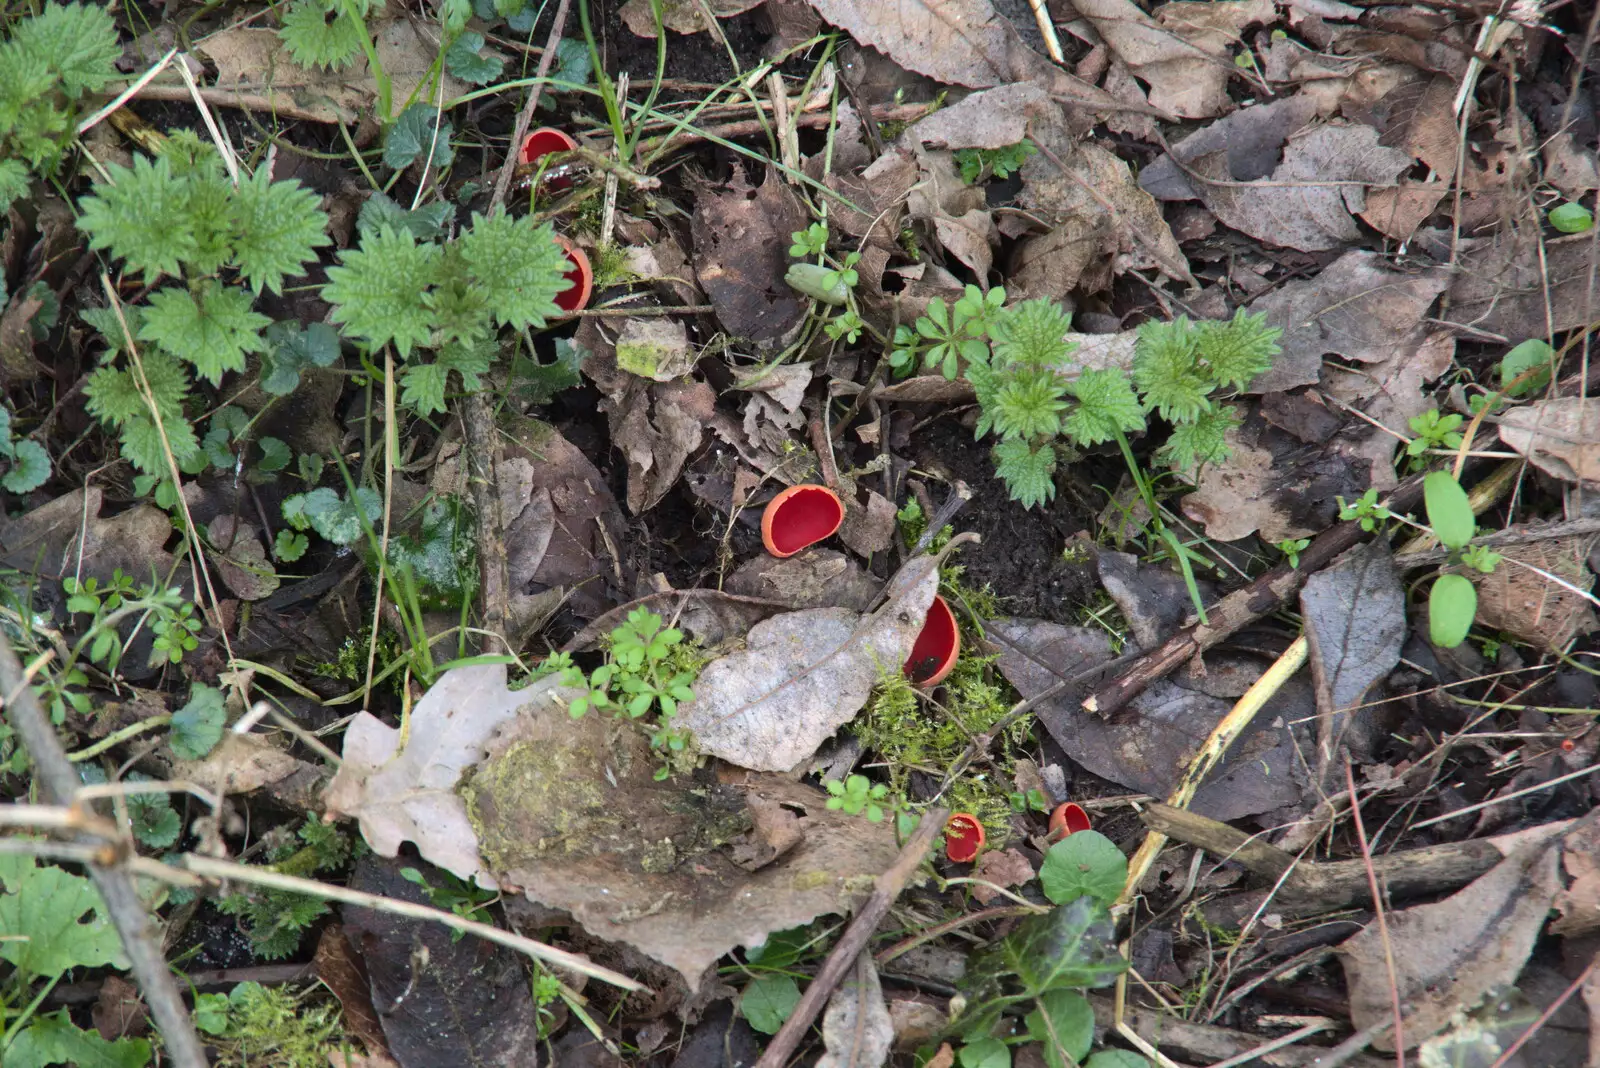 The Scarlet Elf Cup mushrooms are back, from A Short Walk in the Woods, Eye, Suffolk - 4th March 2023